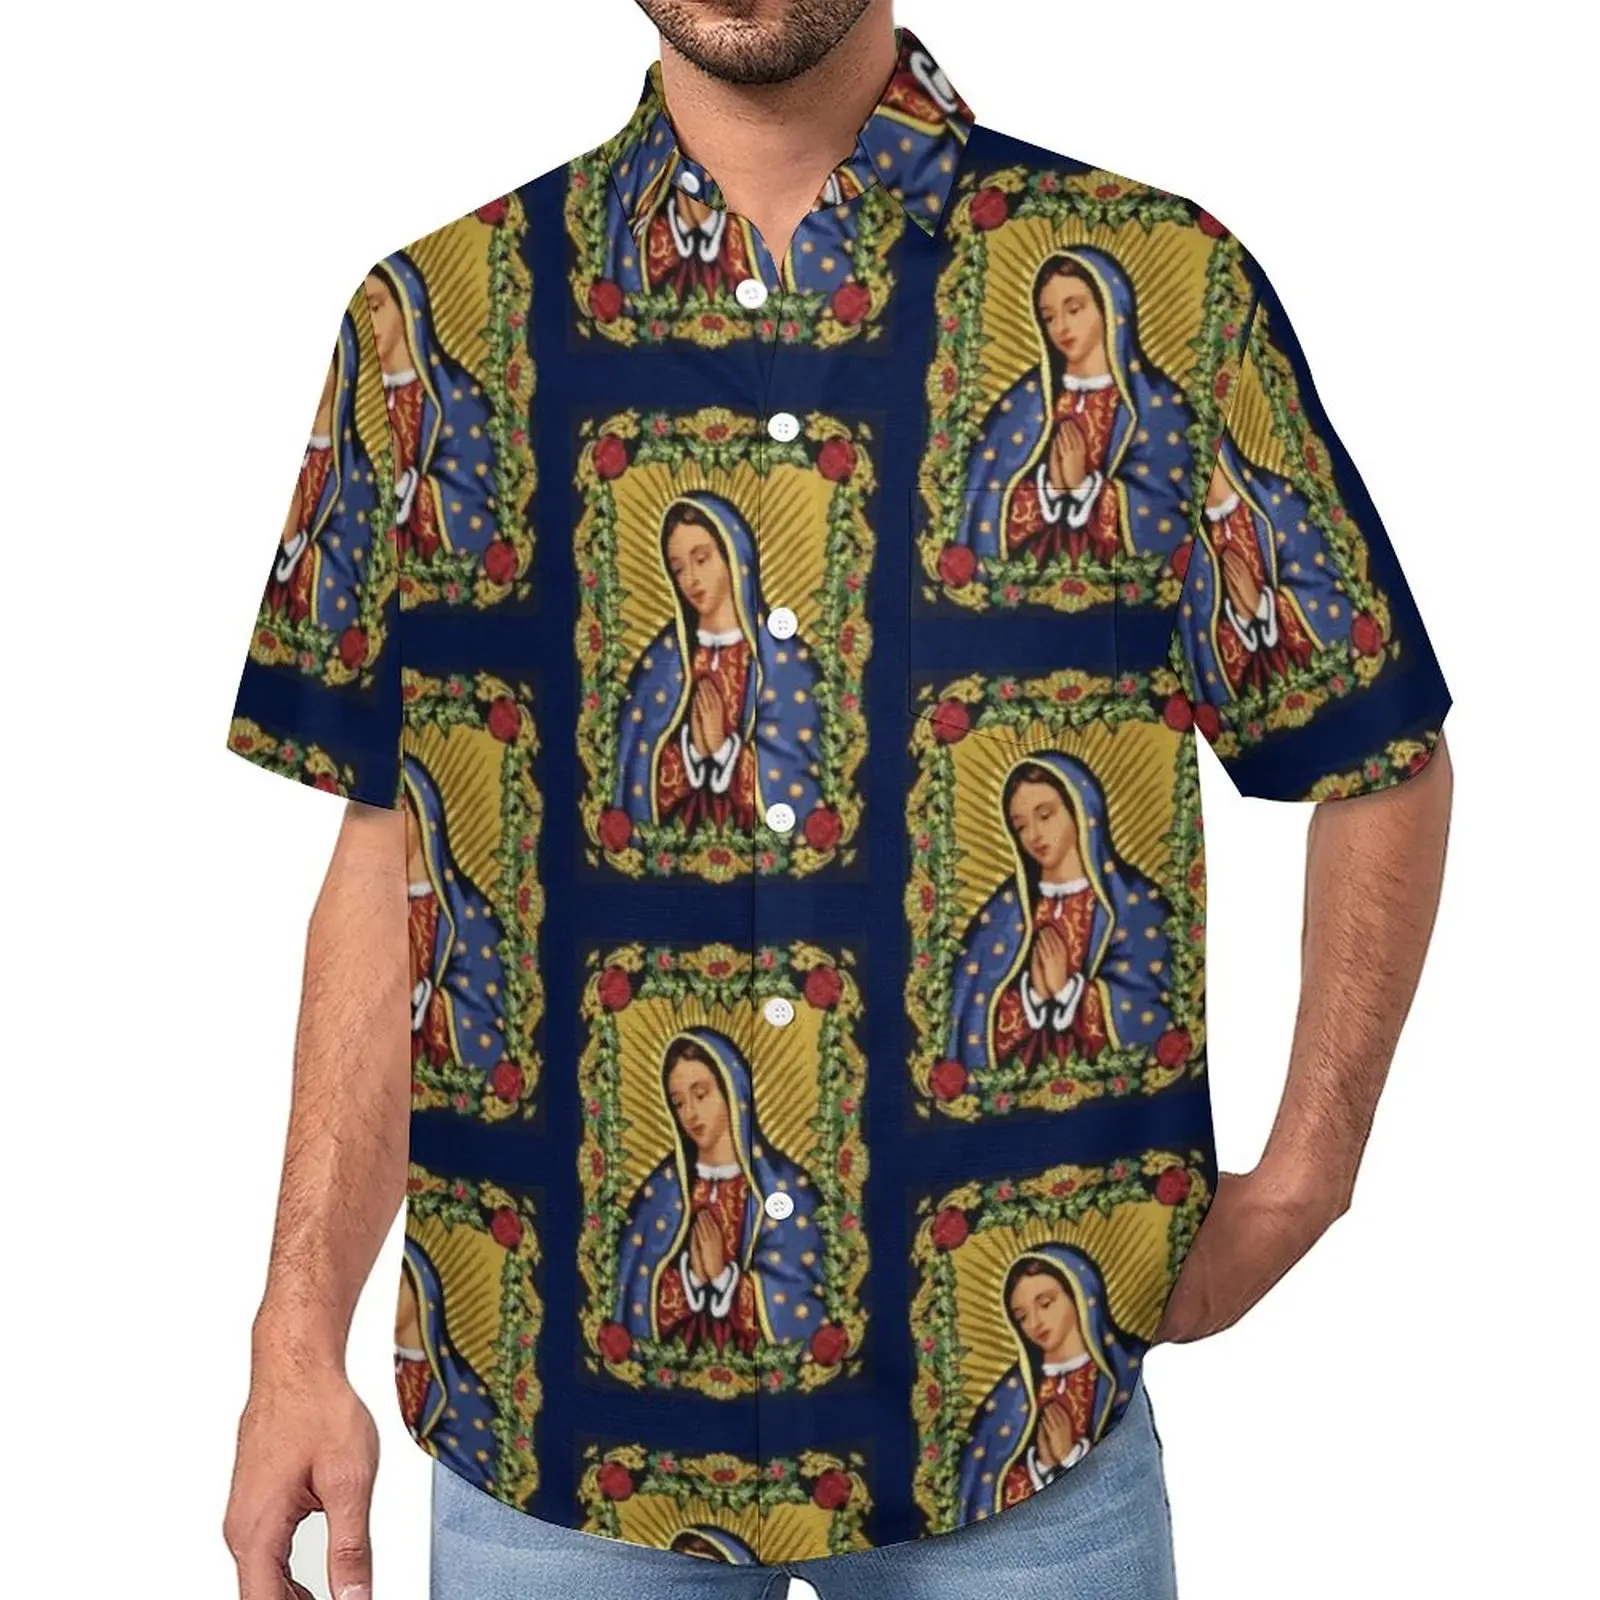 

Our Lady of Guadalupe Casual Shirt Virgin Mary Beach Loose Shirt Hawaii Streetwear Blouses Short-Sleeve Design Oversize Clothing